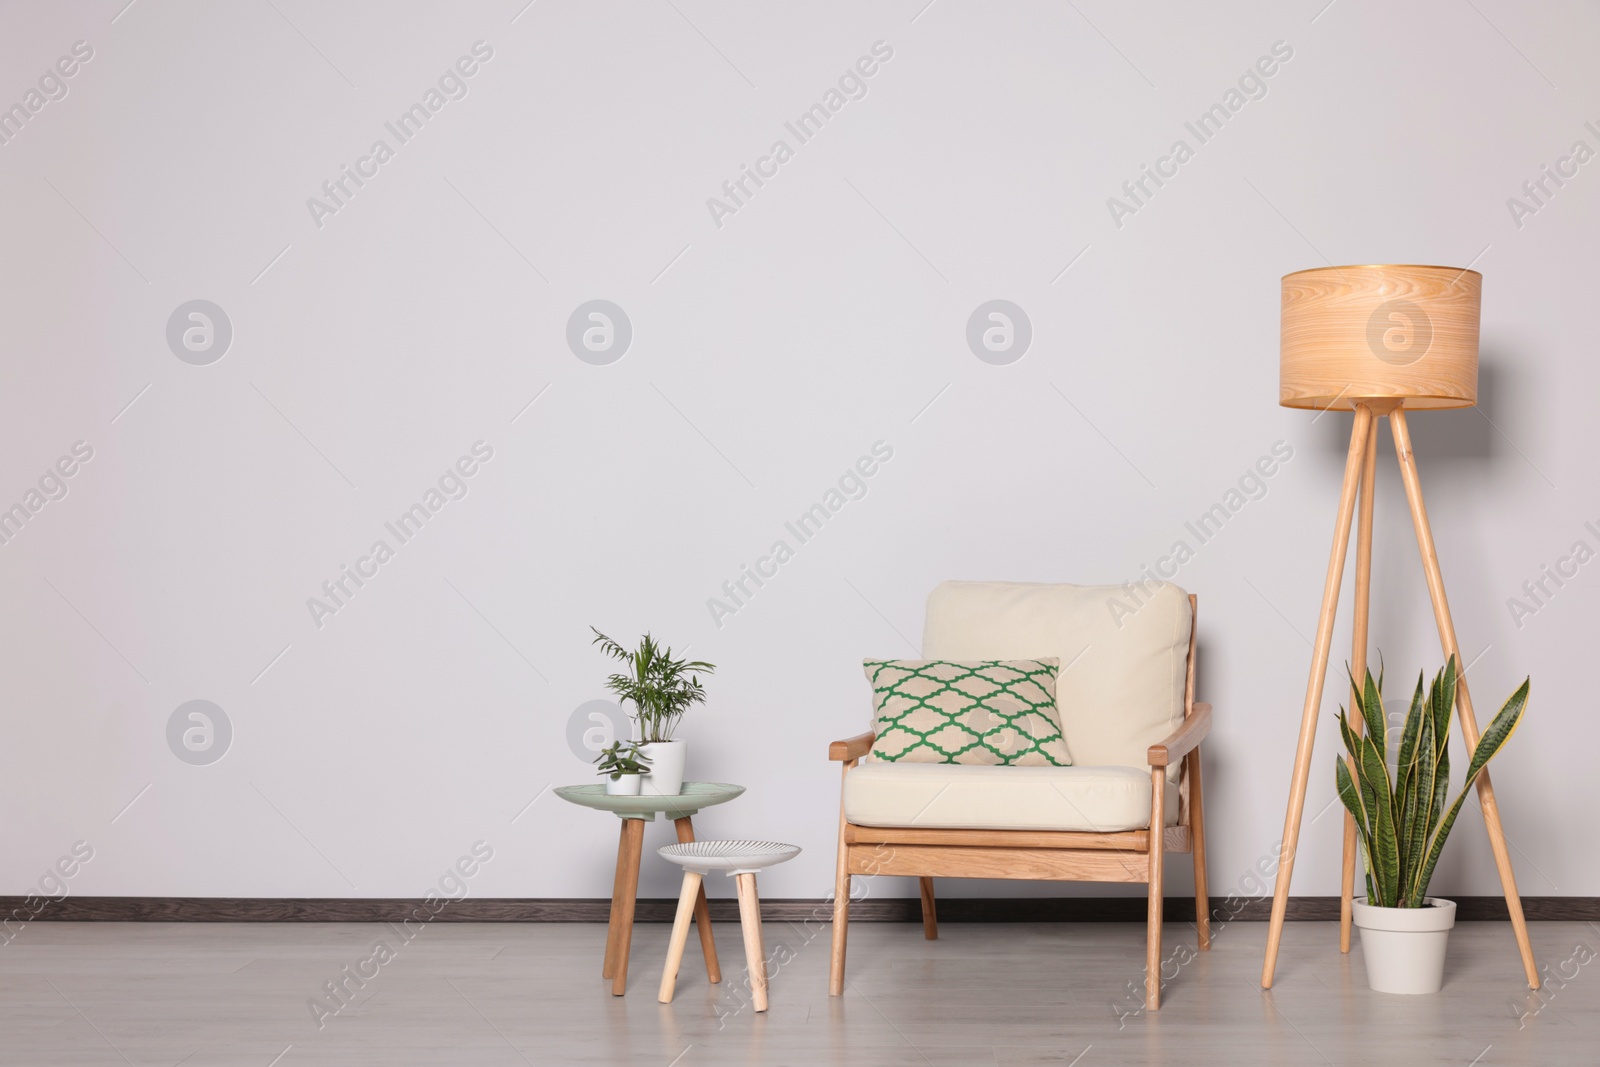 Photo of Stylish armchair, floor lamp and plants near white wall, space for text. Interior design